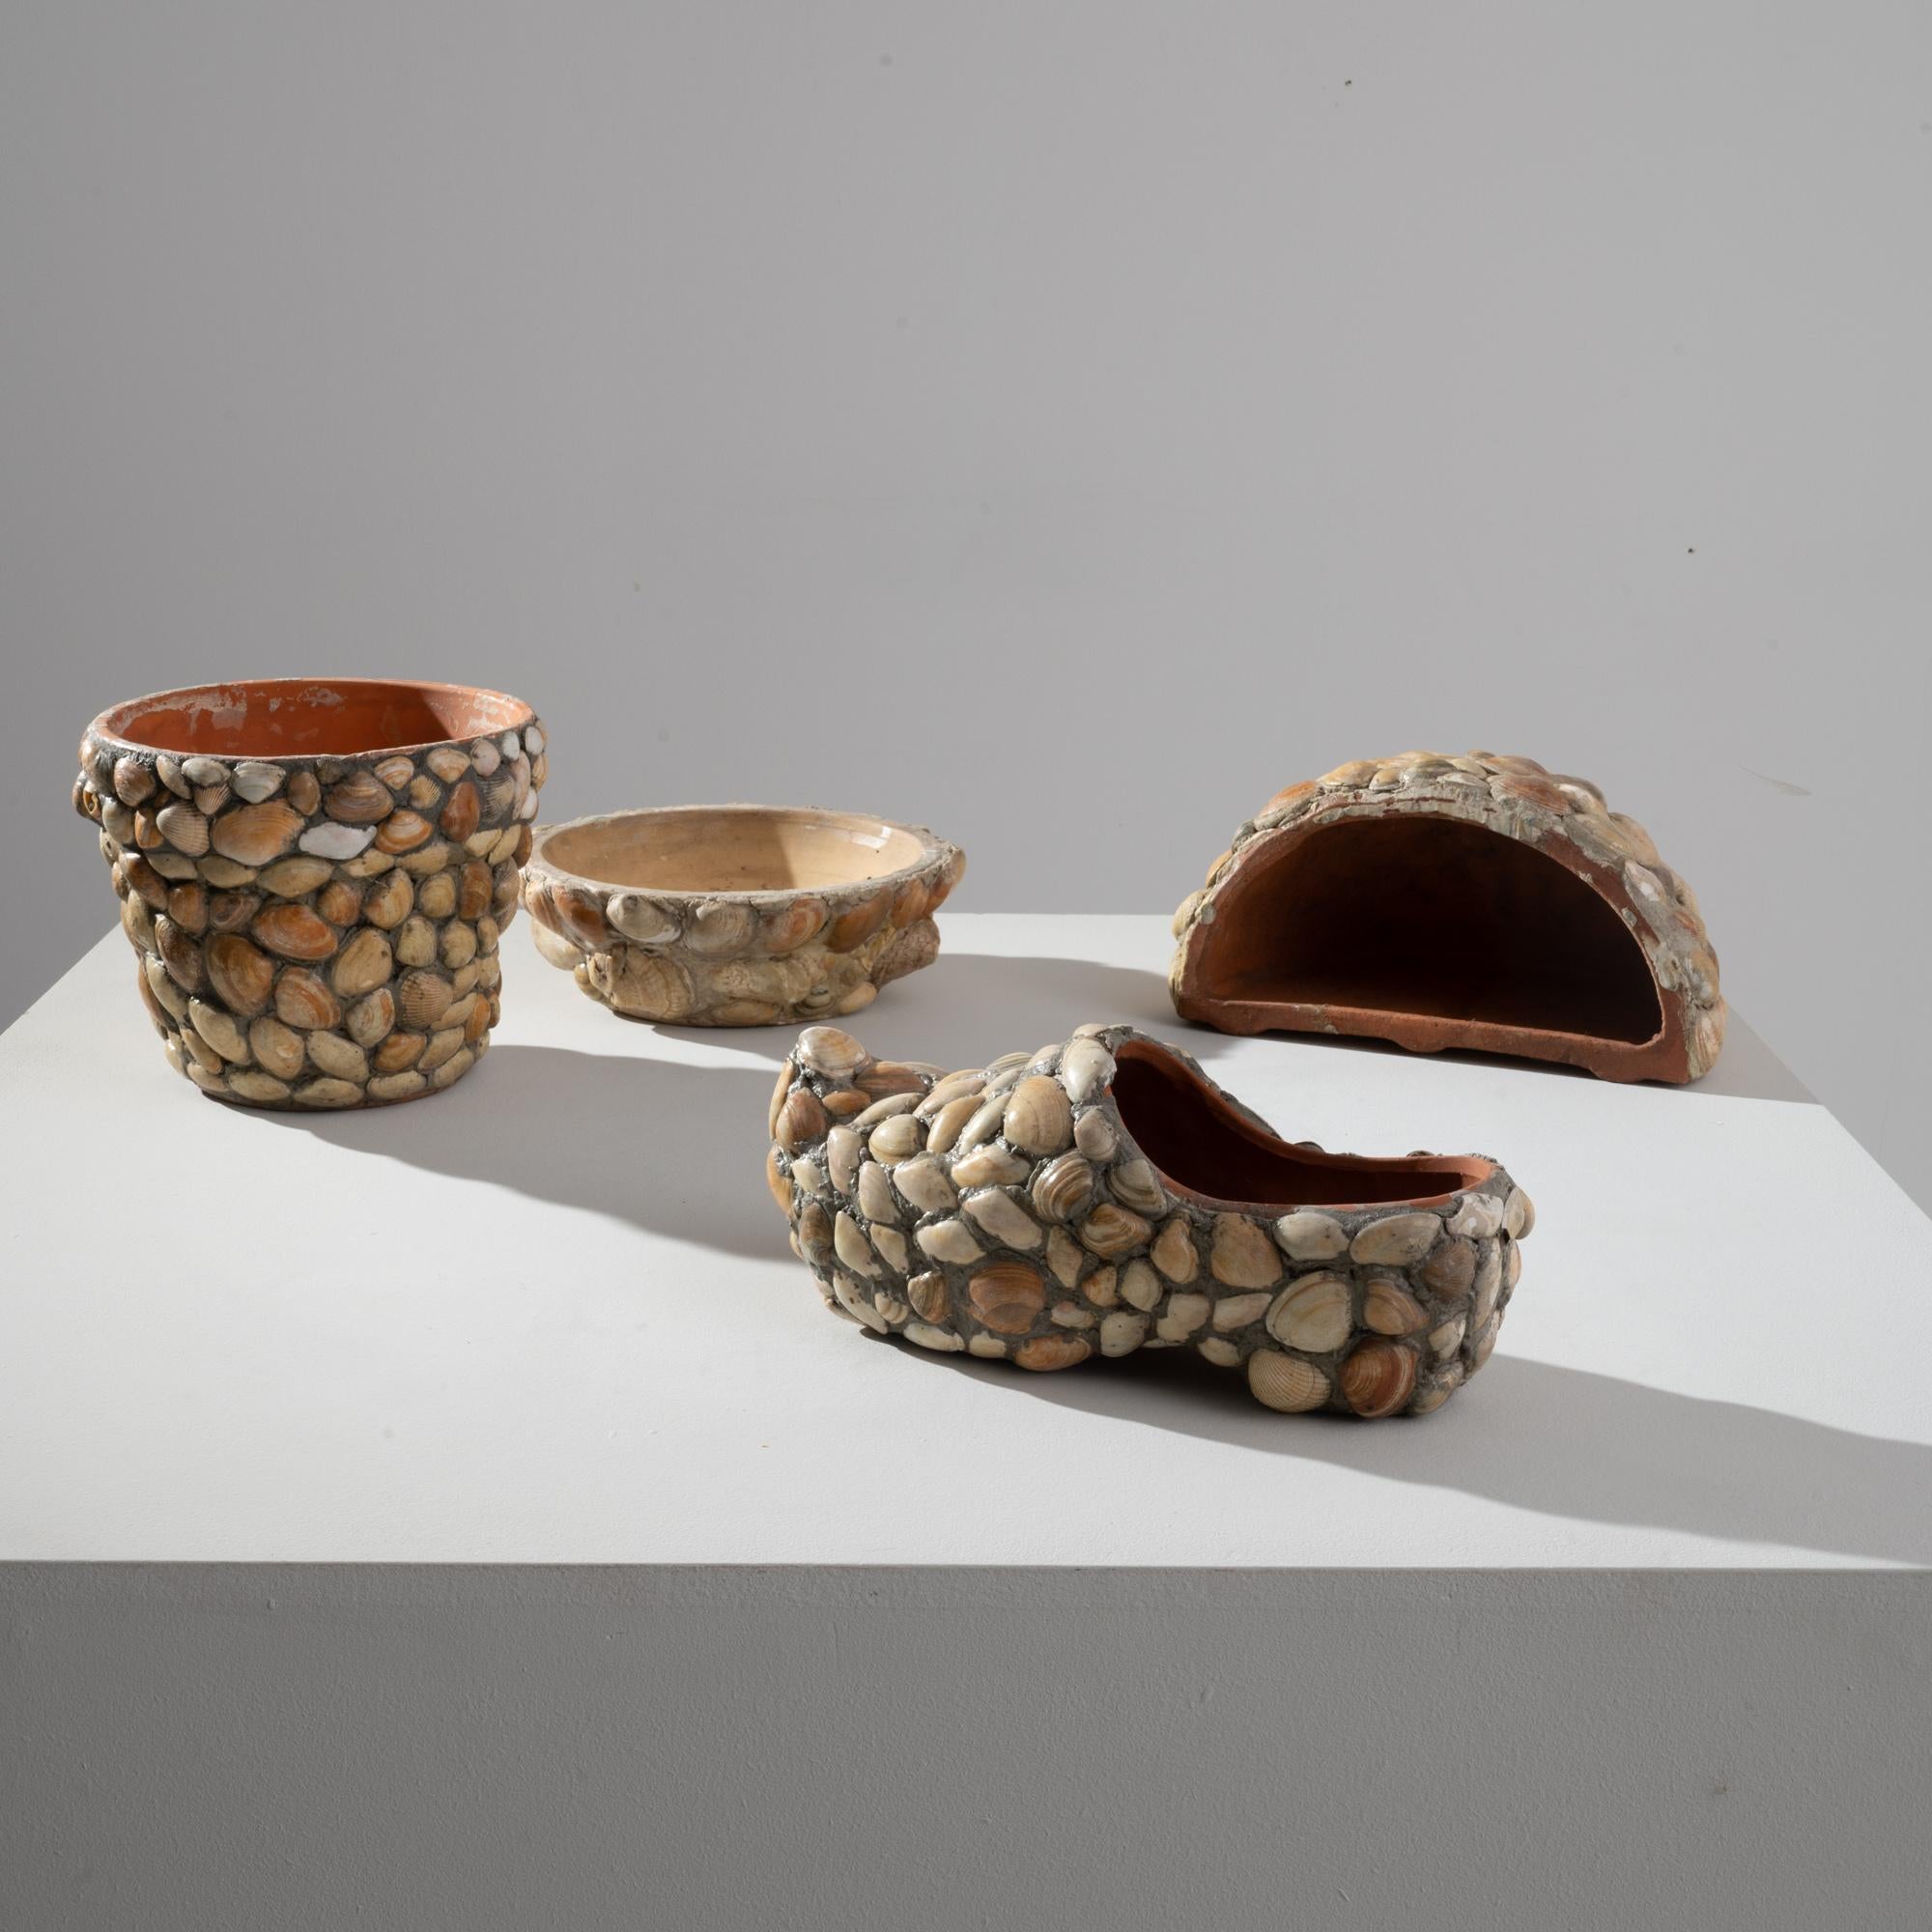 This set of vintage ceramic decorations comprises four pottery objects decorated with local shells: a clog, a bowl, a pot, and a small hemispheric repository. Made in France in the 20th century, these pieces have a handcrafted quality —the shells